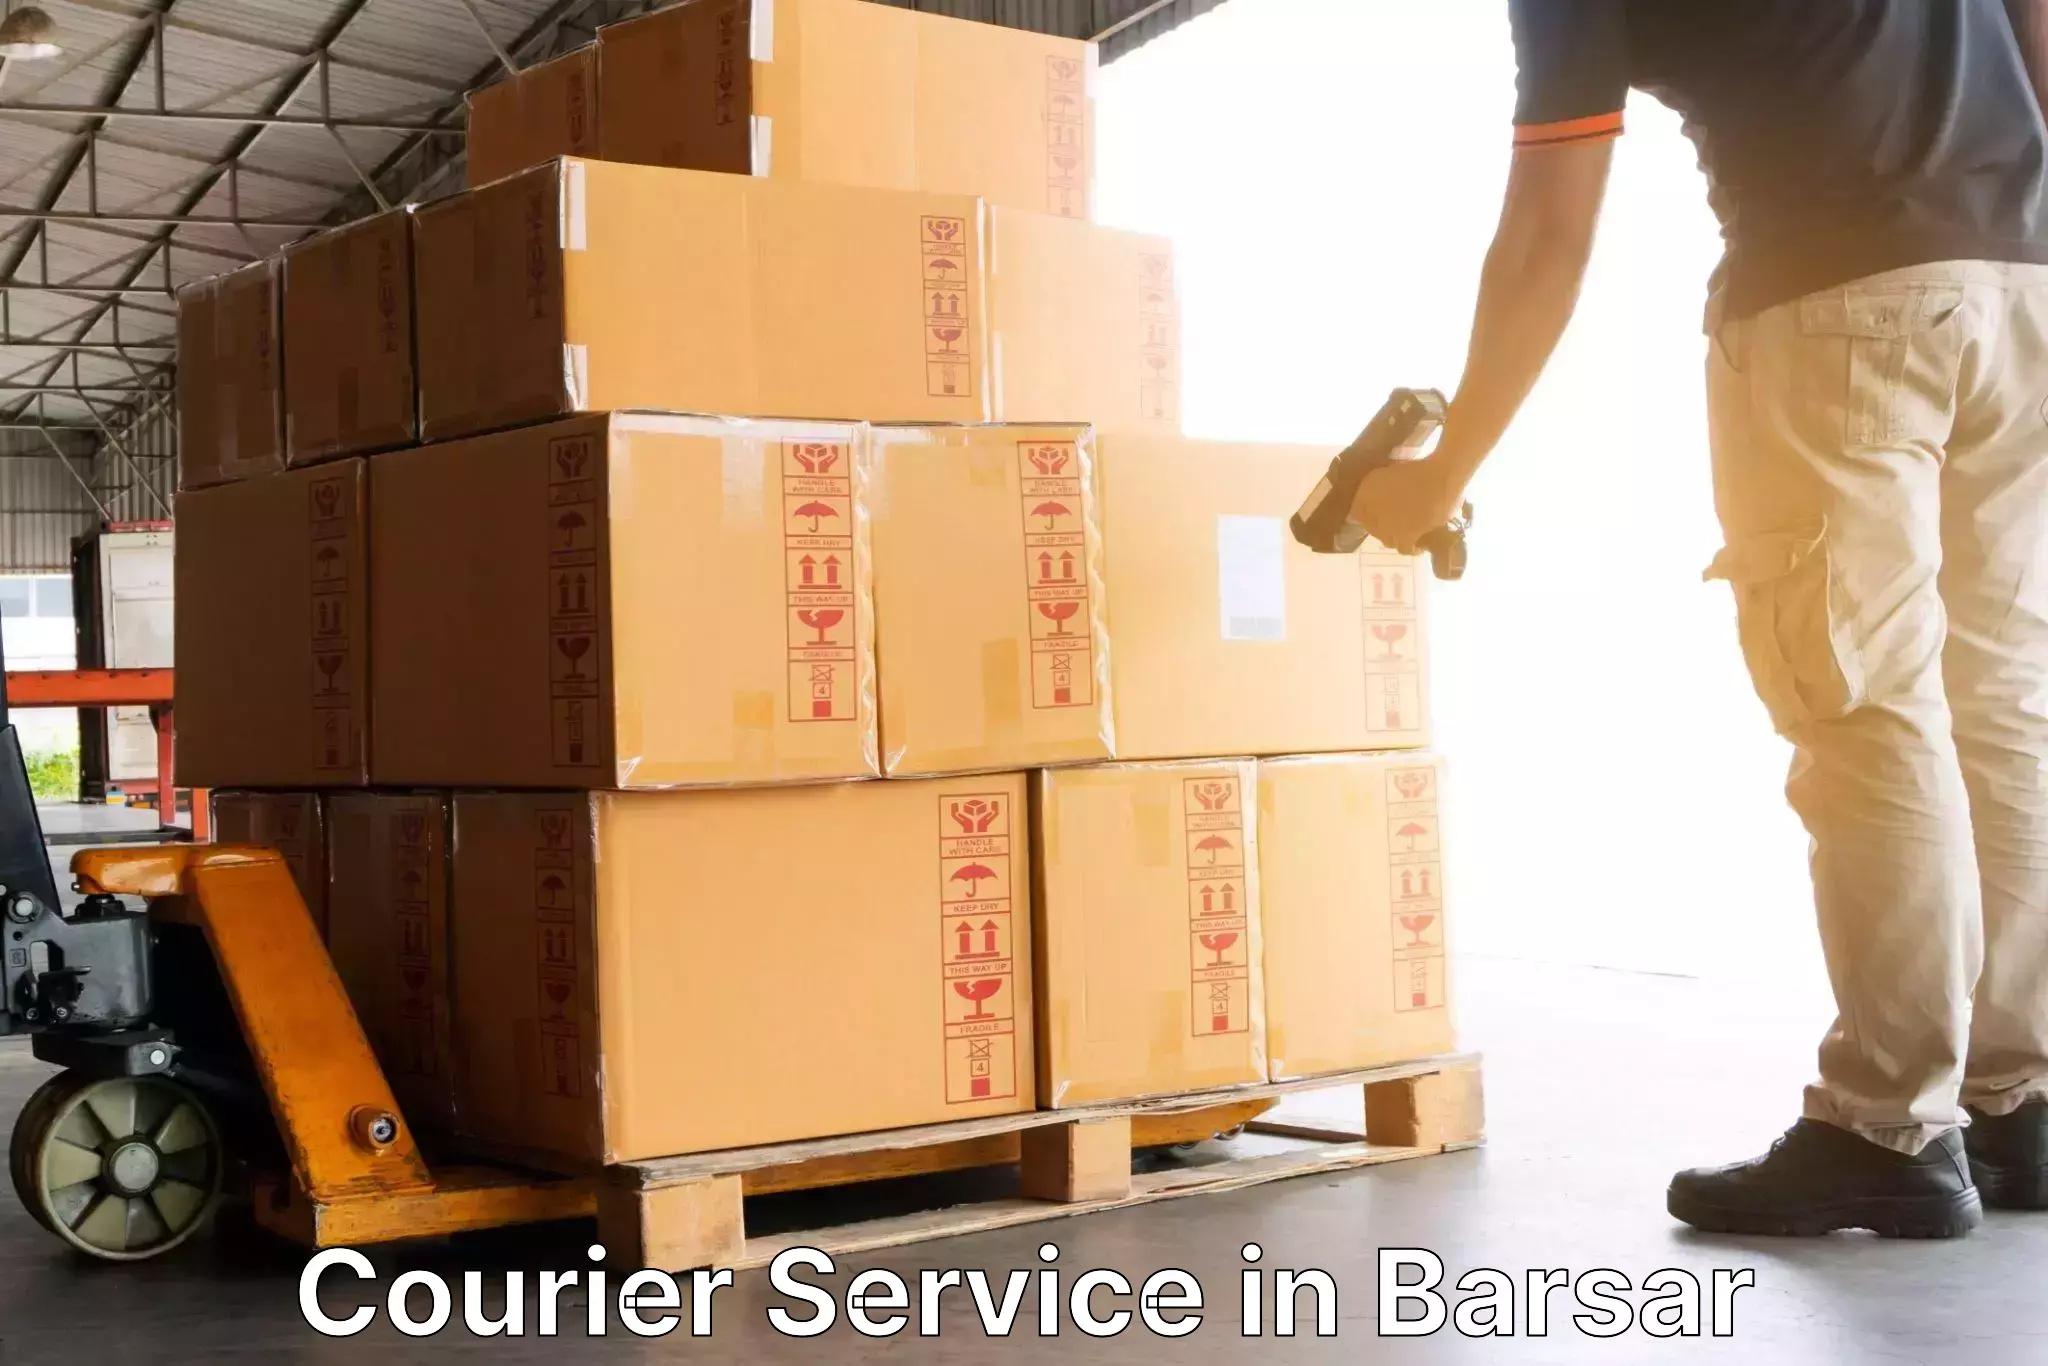 Customer-oriented courier services in Barsar